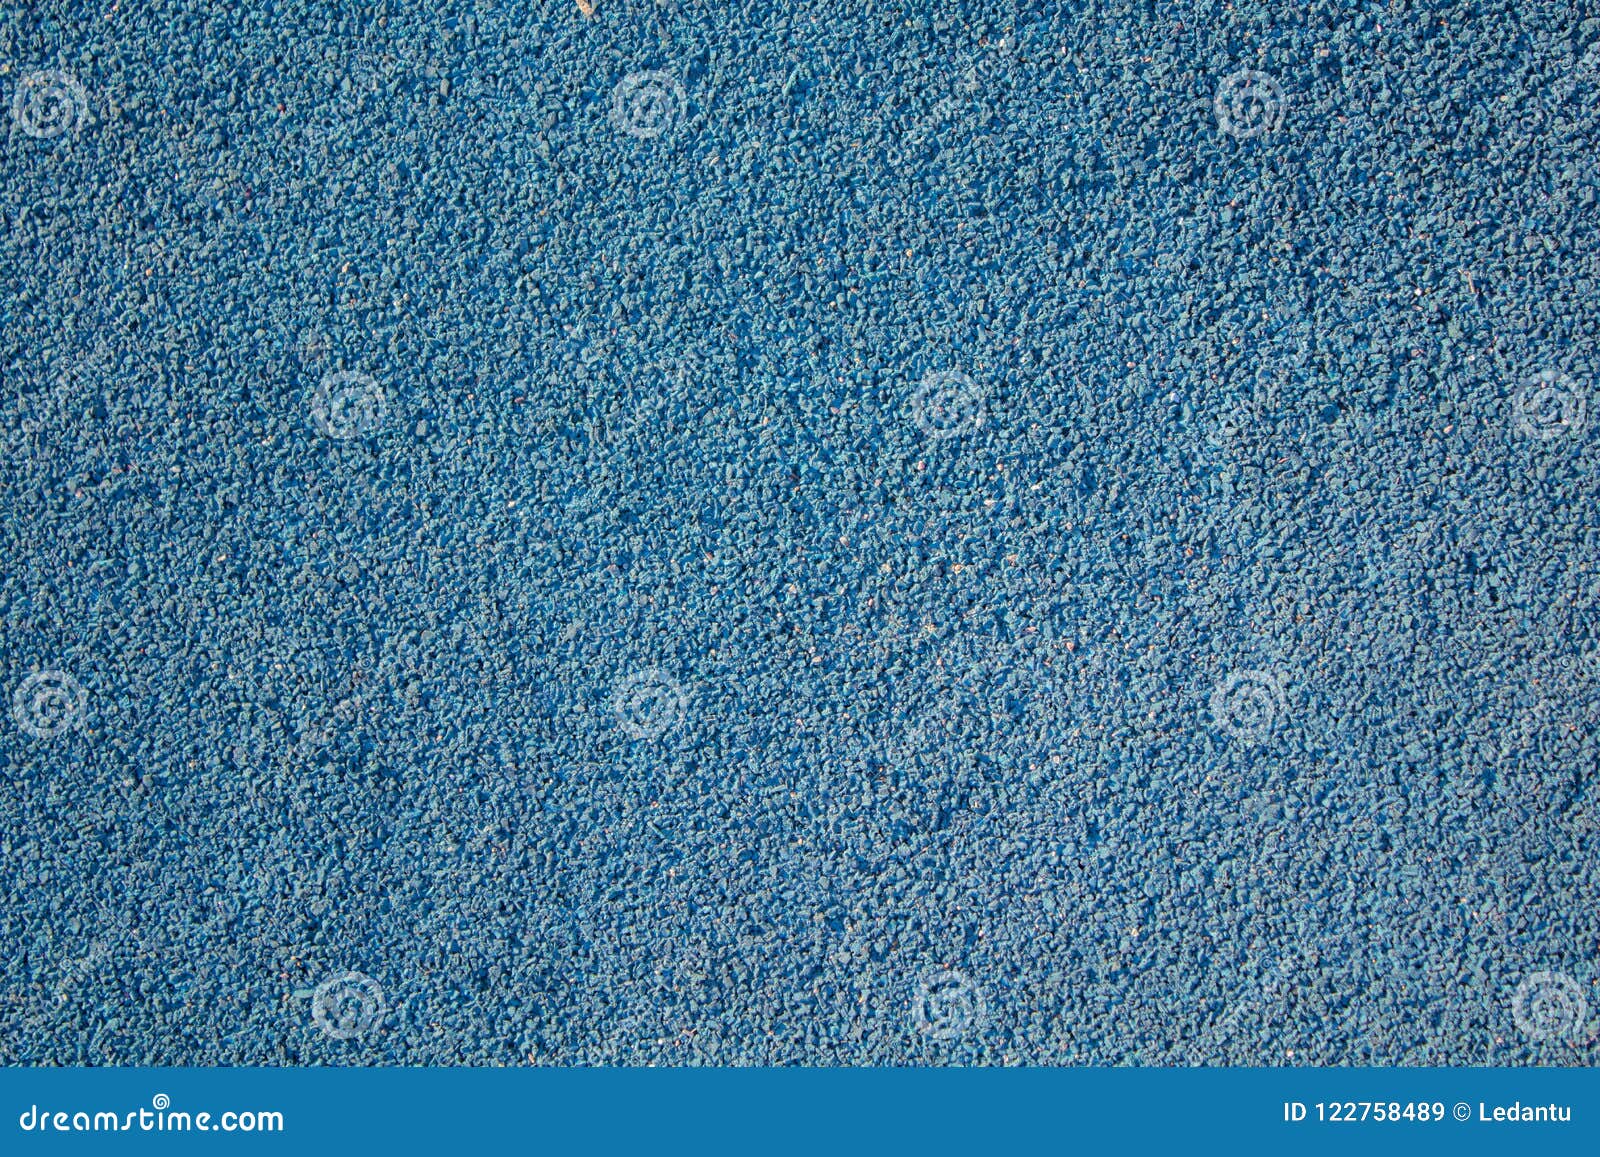 Light Blue Rubber Texture Cover Ground for Child Playgrounds. Stock ...